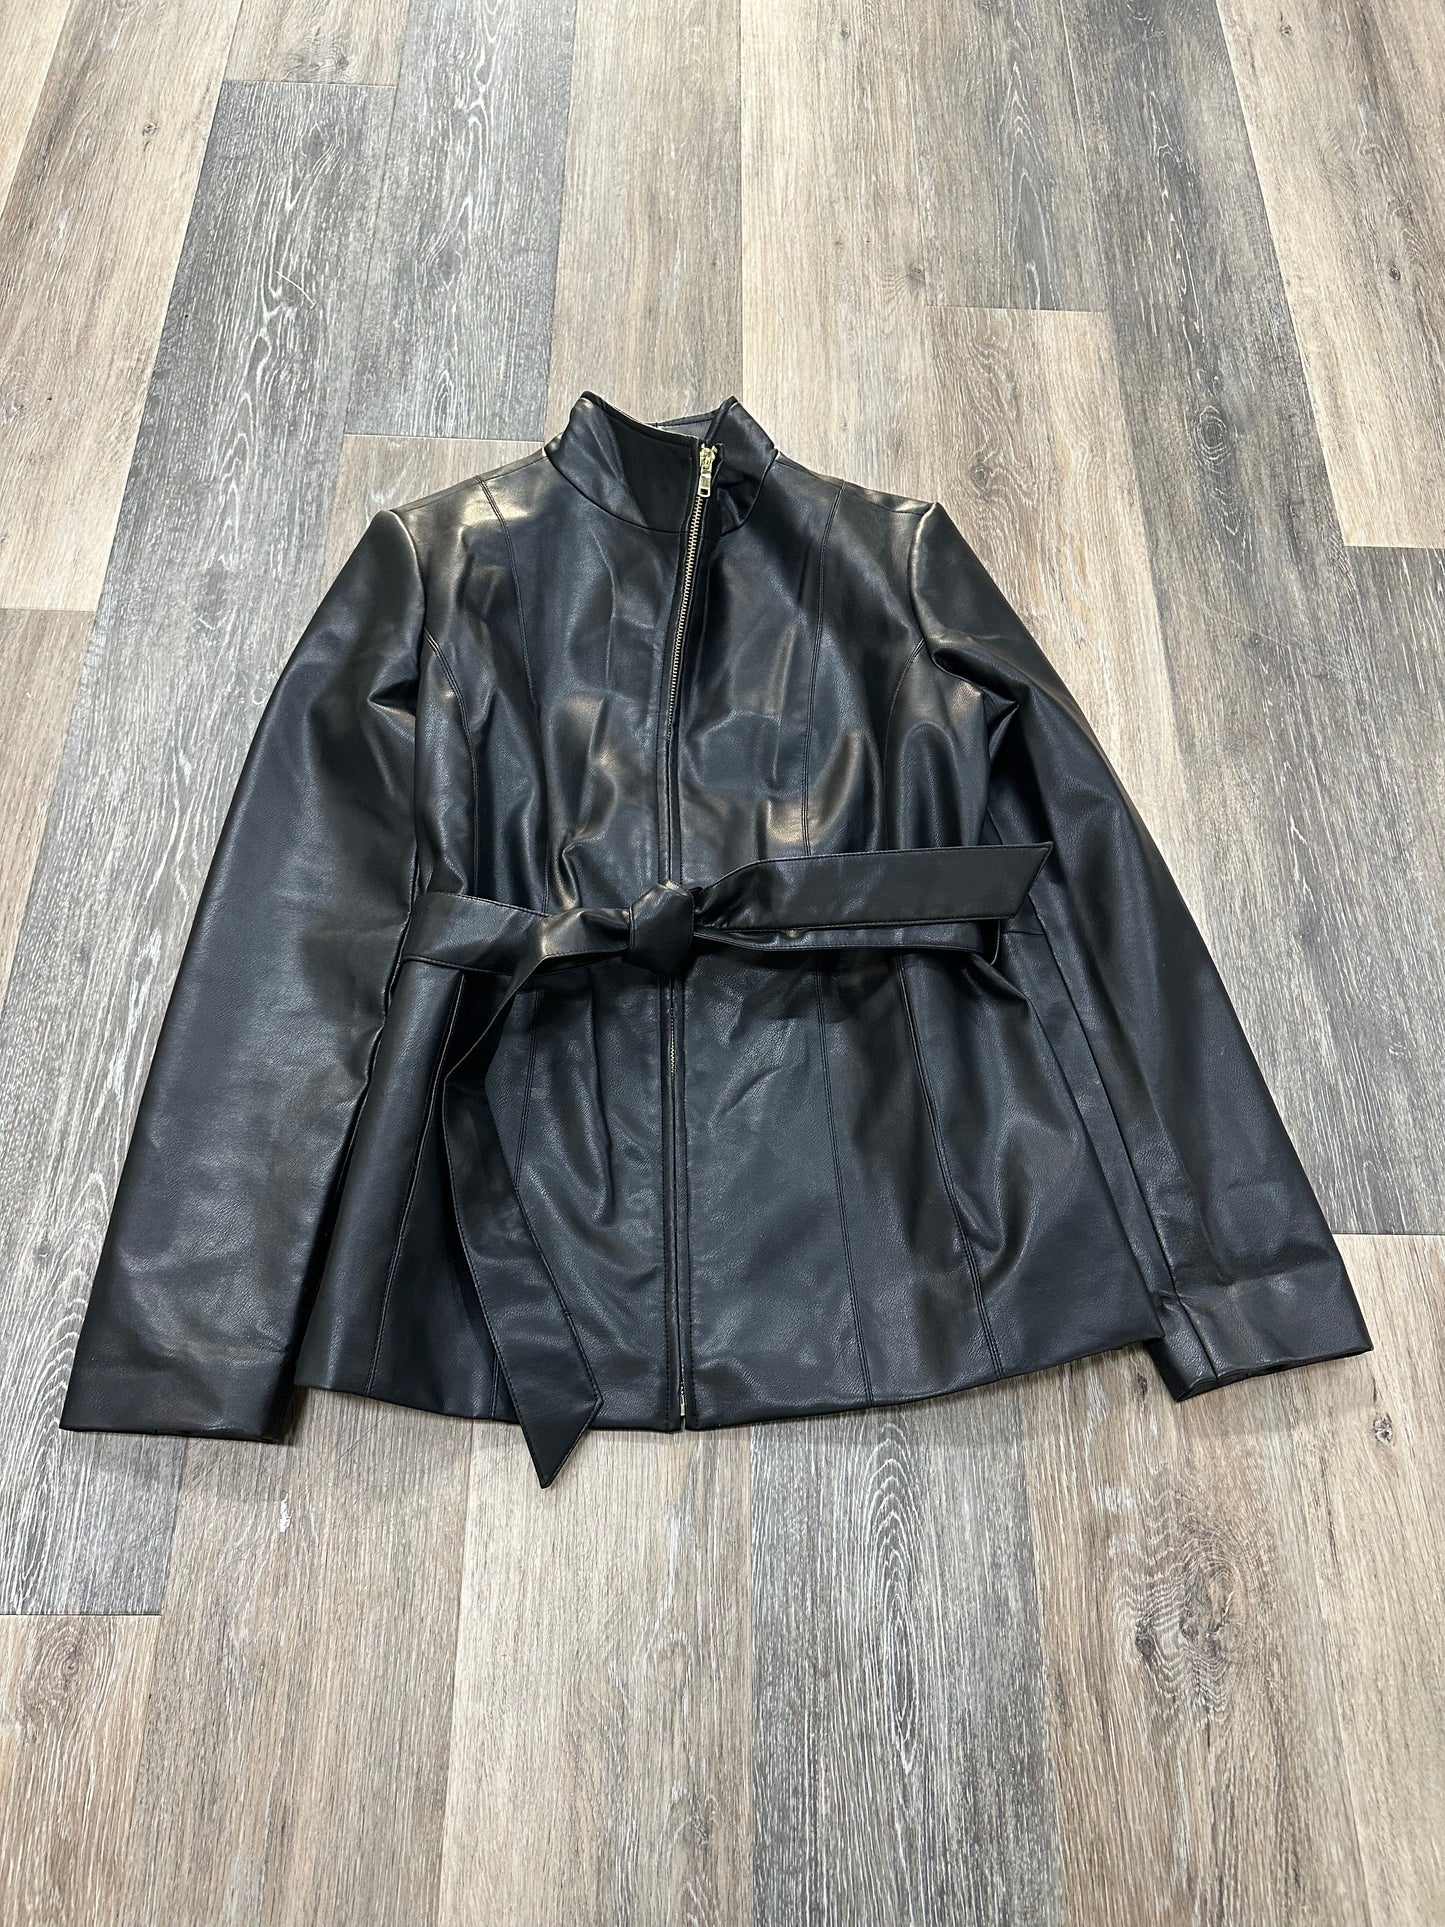 Jacket Leather By Cole-haan  Size: M